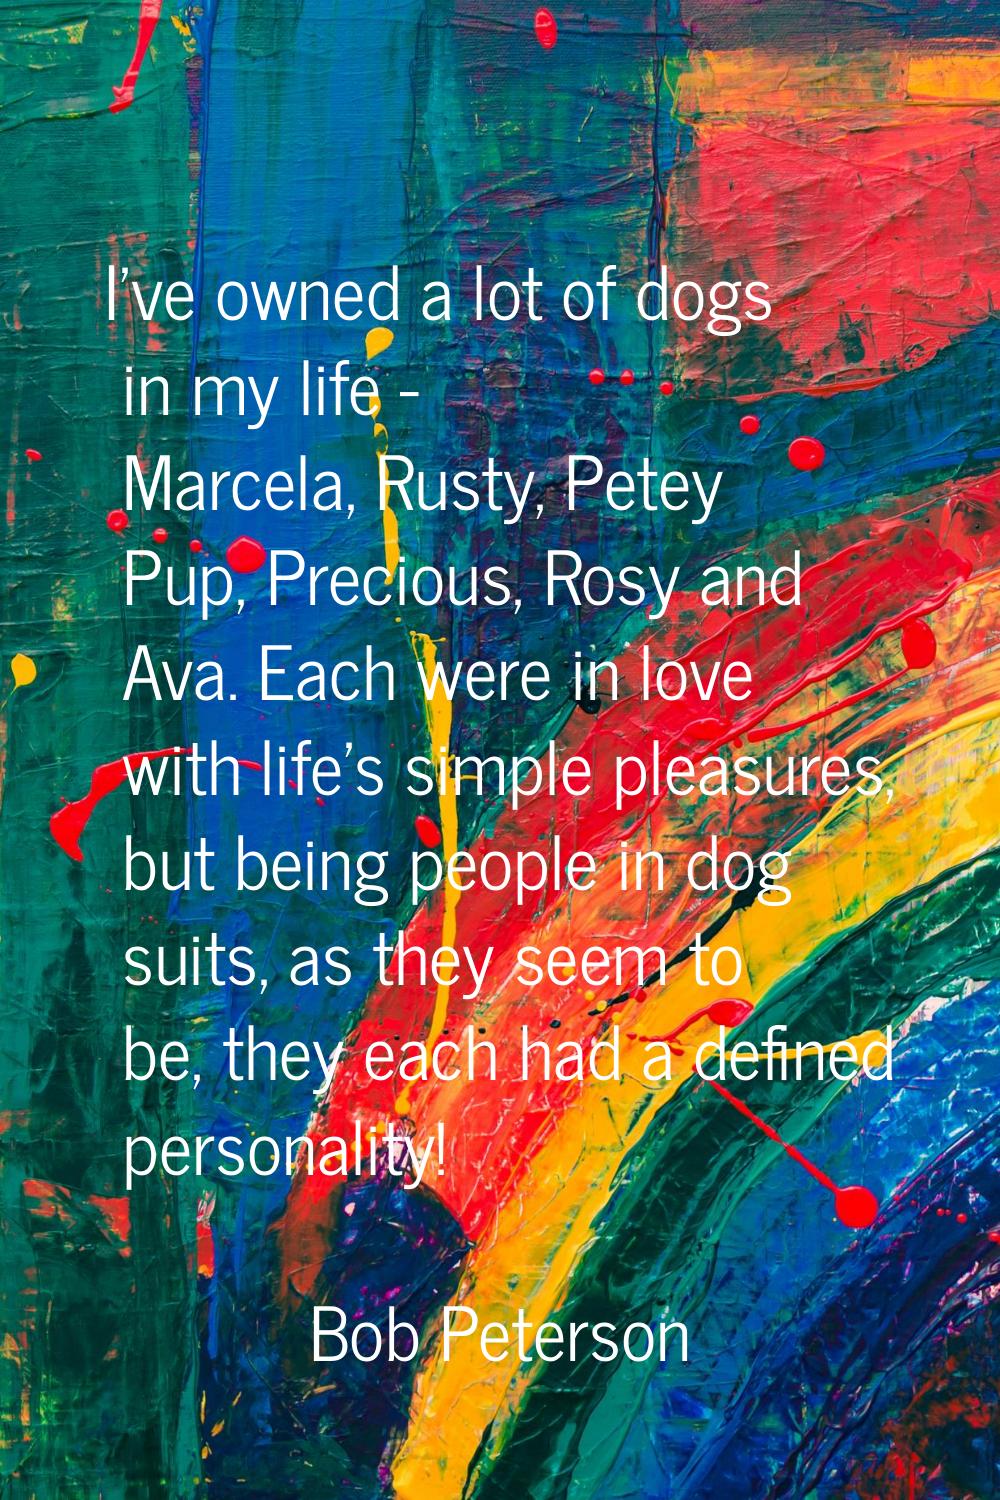 I've owned a lot of dogs in my life - Marcela, Rusty, Petey Pup, Precious, Rosy and Ava. Each were 